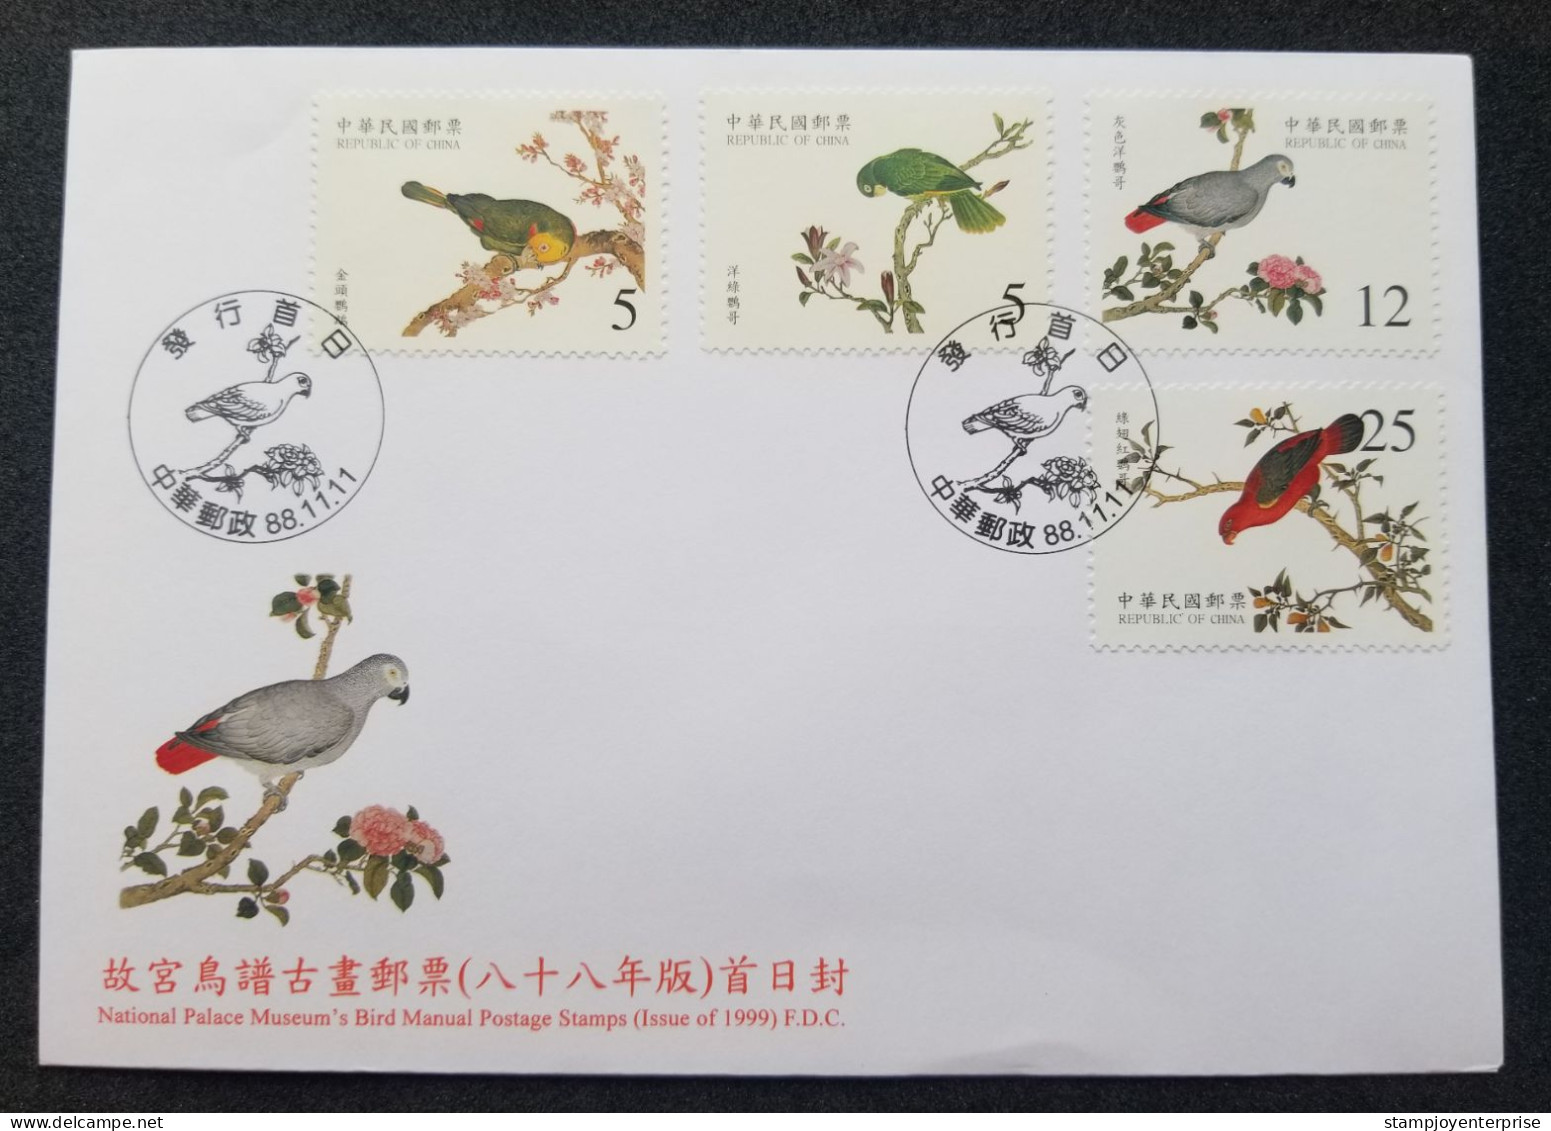 Taiwan National Palace Museum Bird Manual 1999 Chinese Painting Flower Tree Birds (stamp FDC) - Covers & Documents